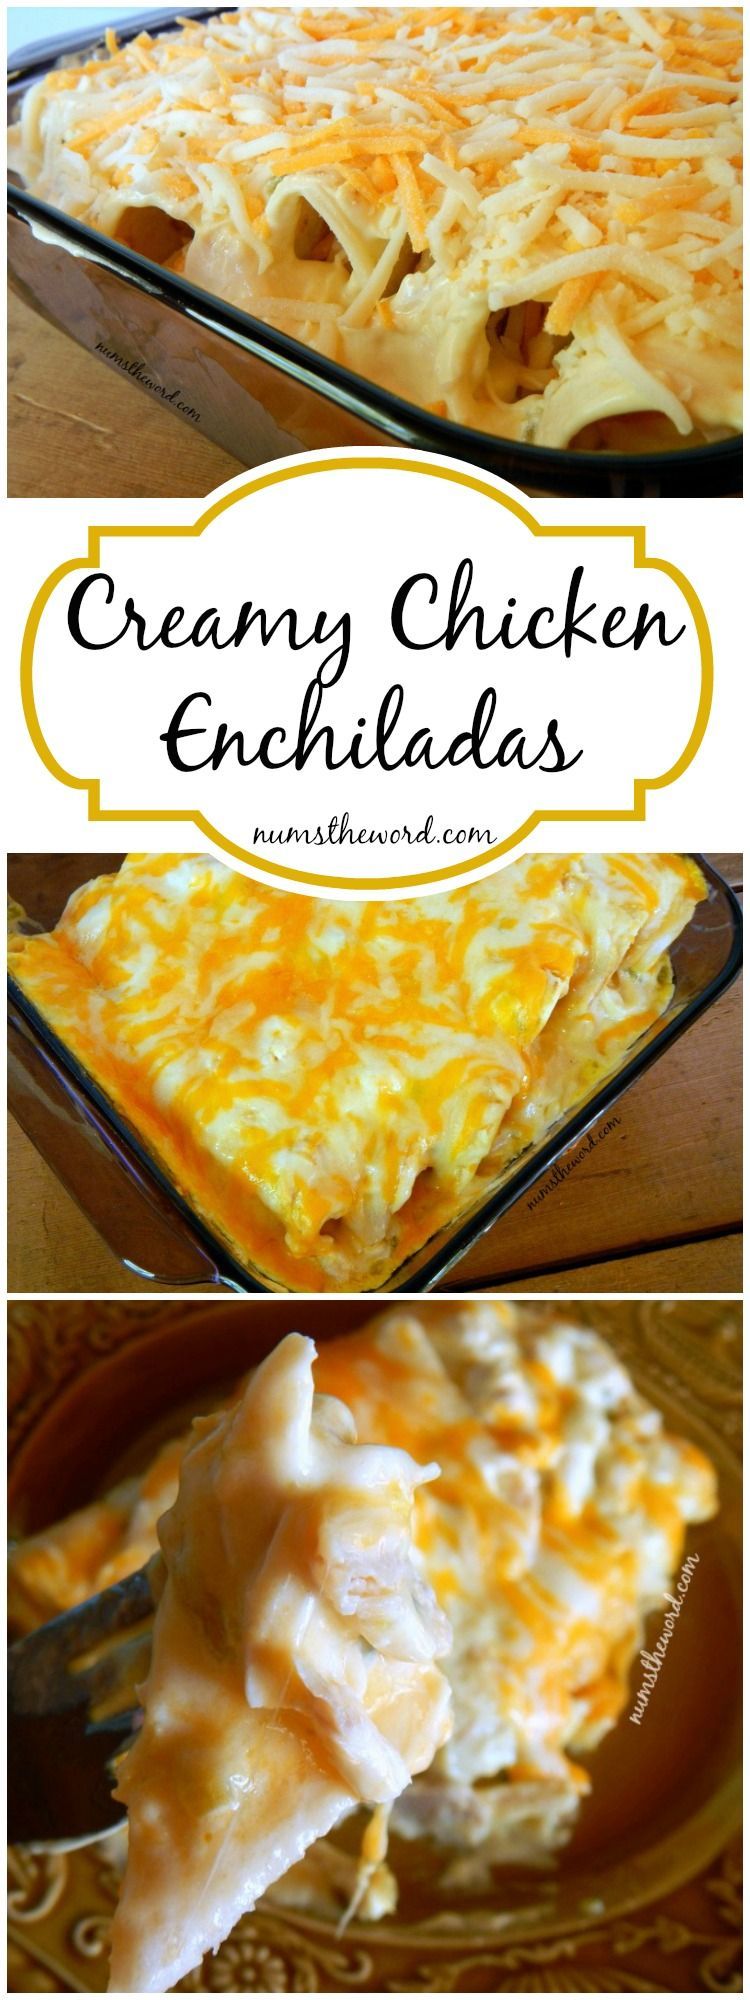 These simple non-traditional creamy chicken enchiladas are a huge hit with our family. 6 ingredients and 30 minutes is all you